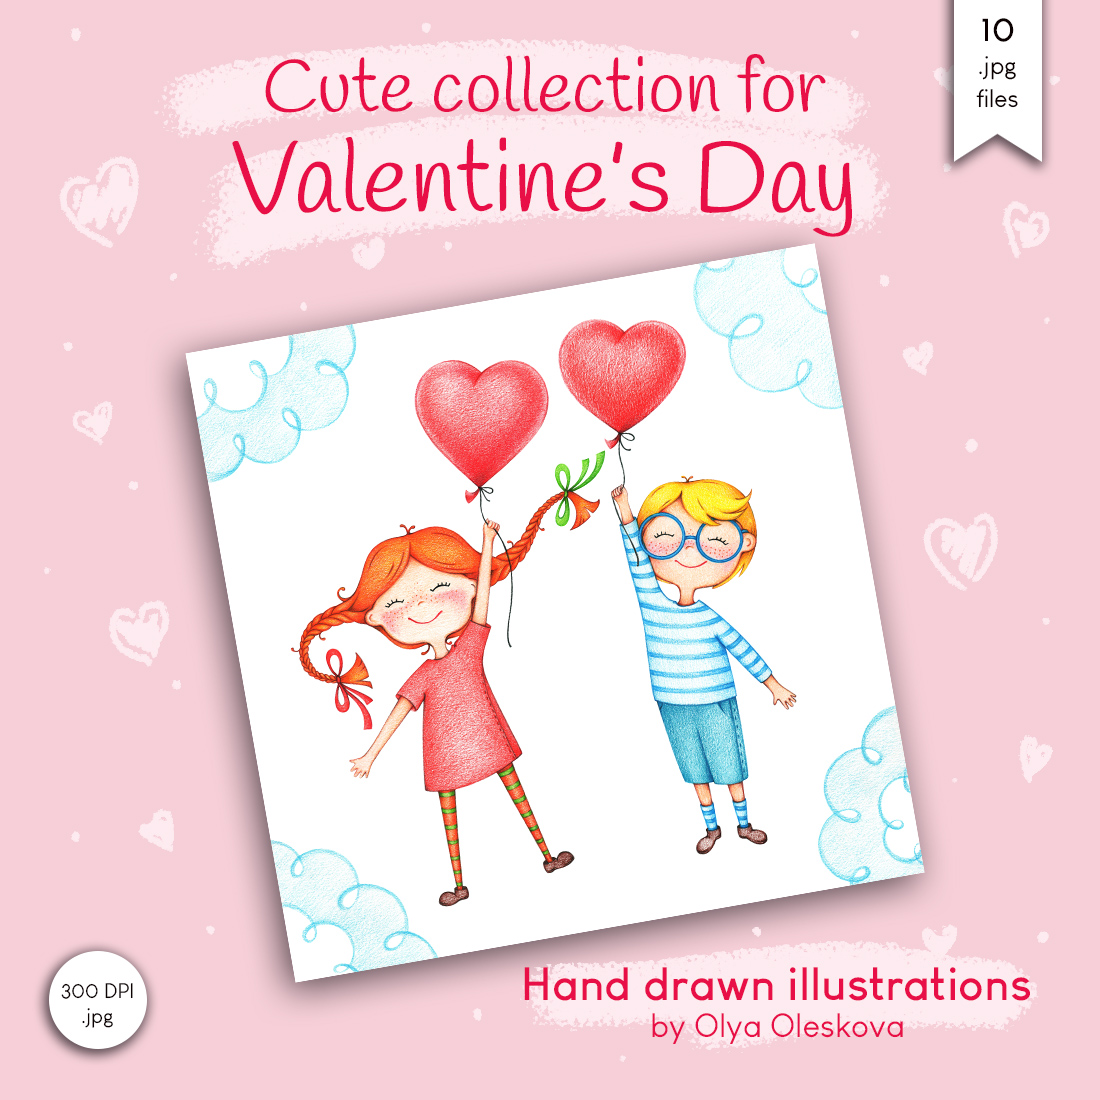 Cute Hand Drawn Illustrations for Valentines Day cover image.